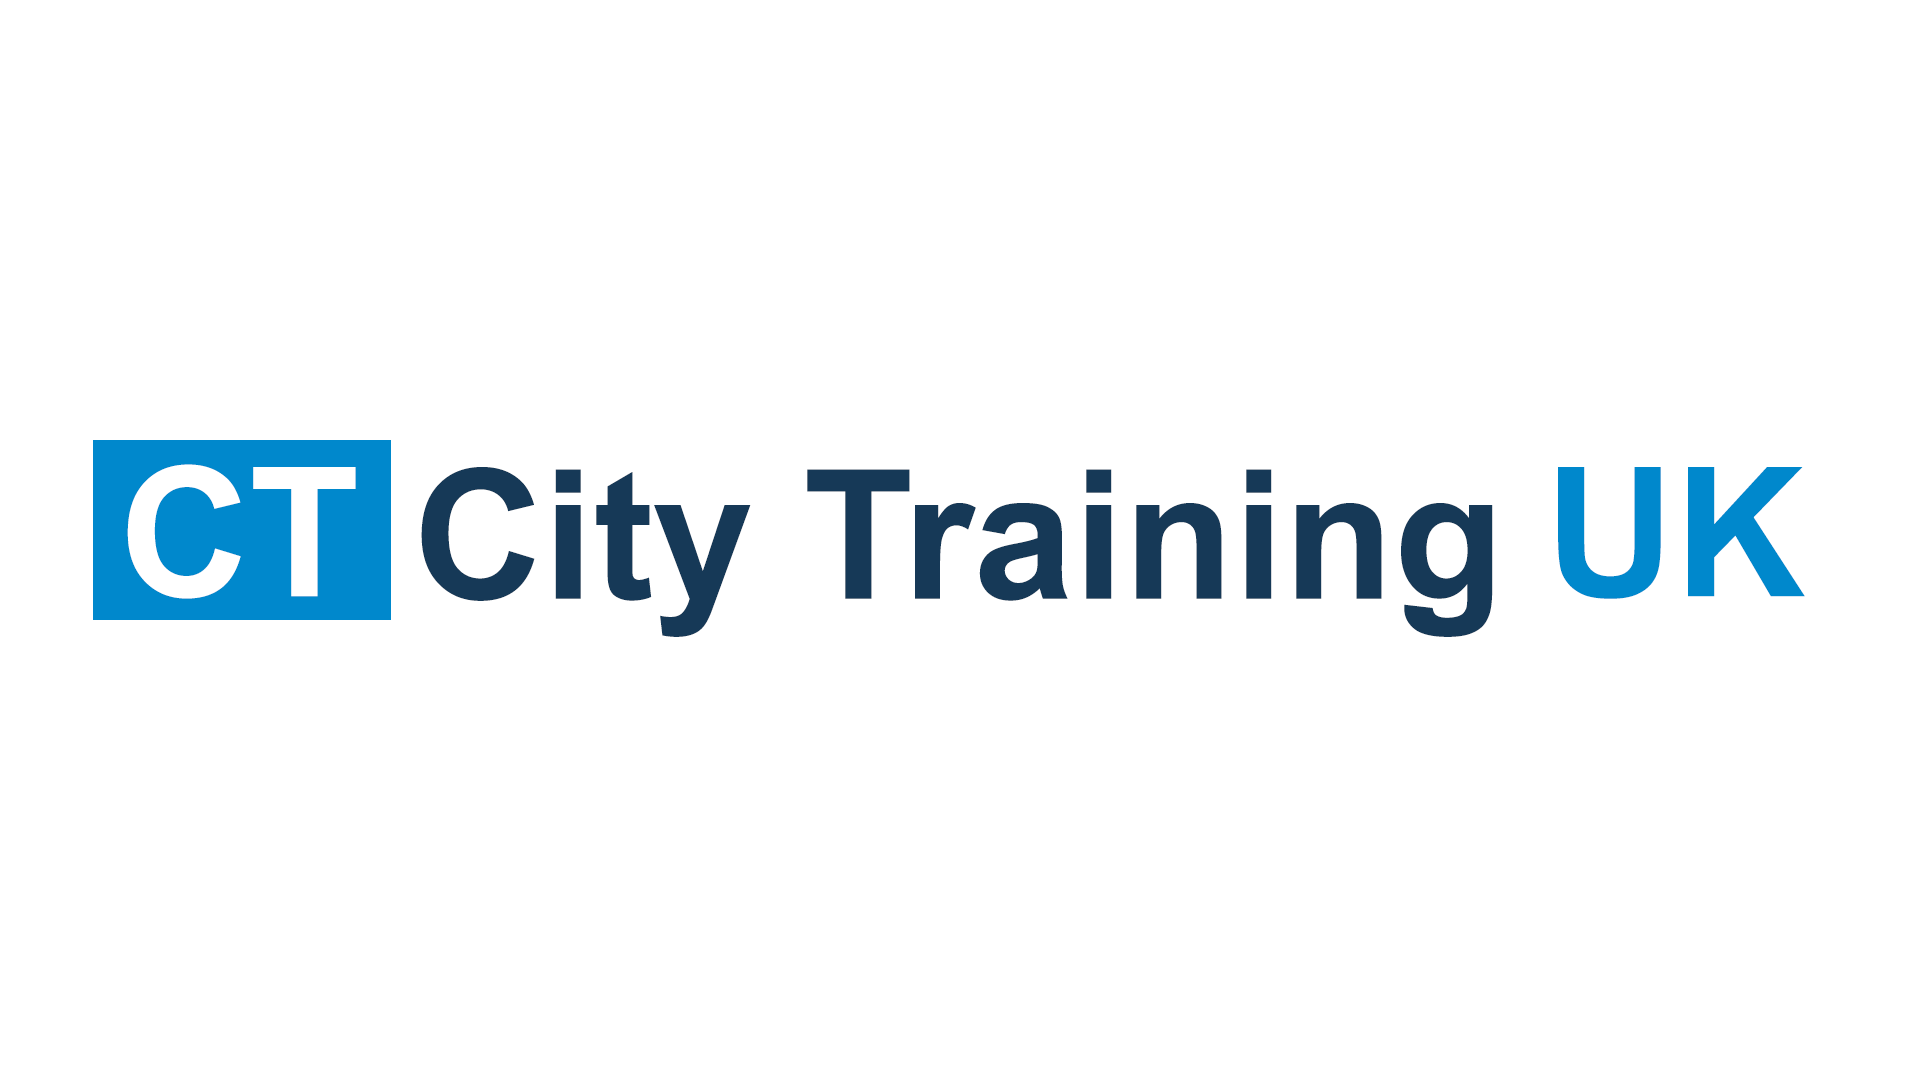 More about City Training UK